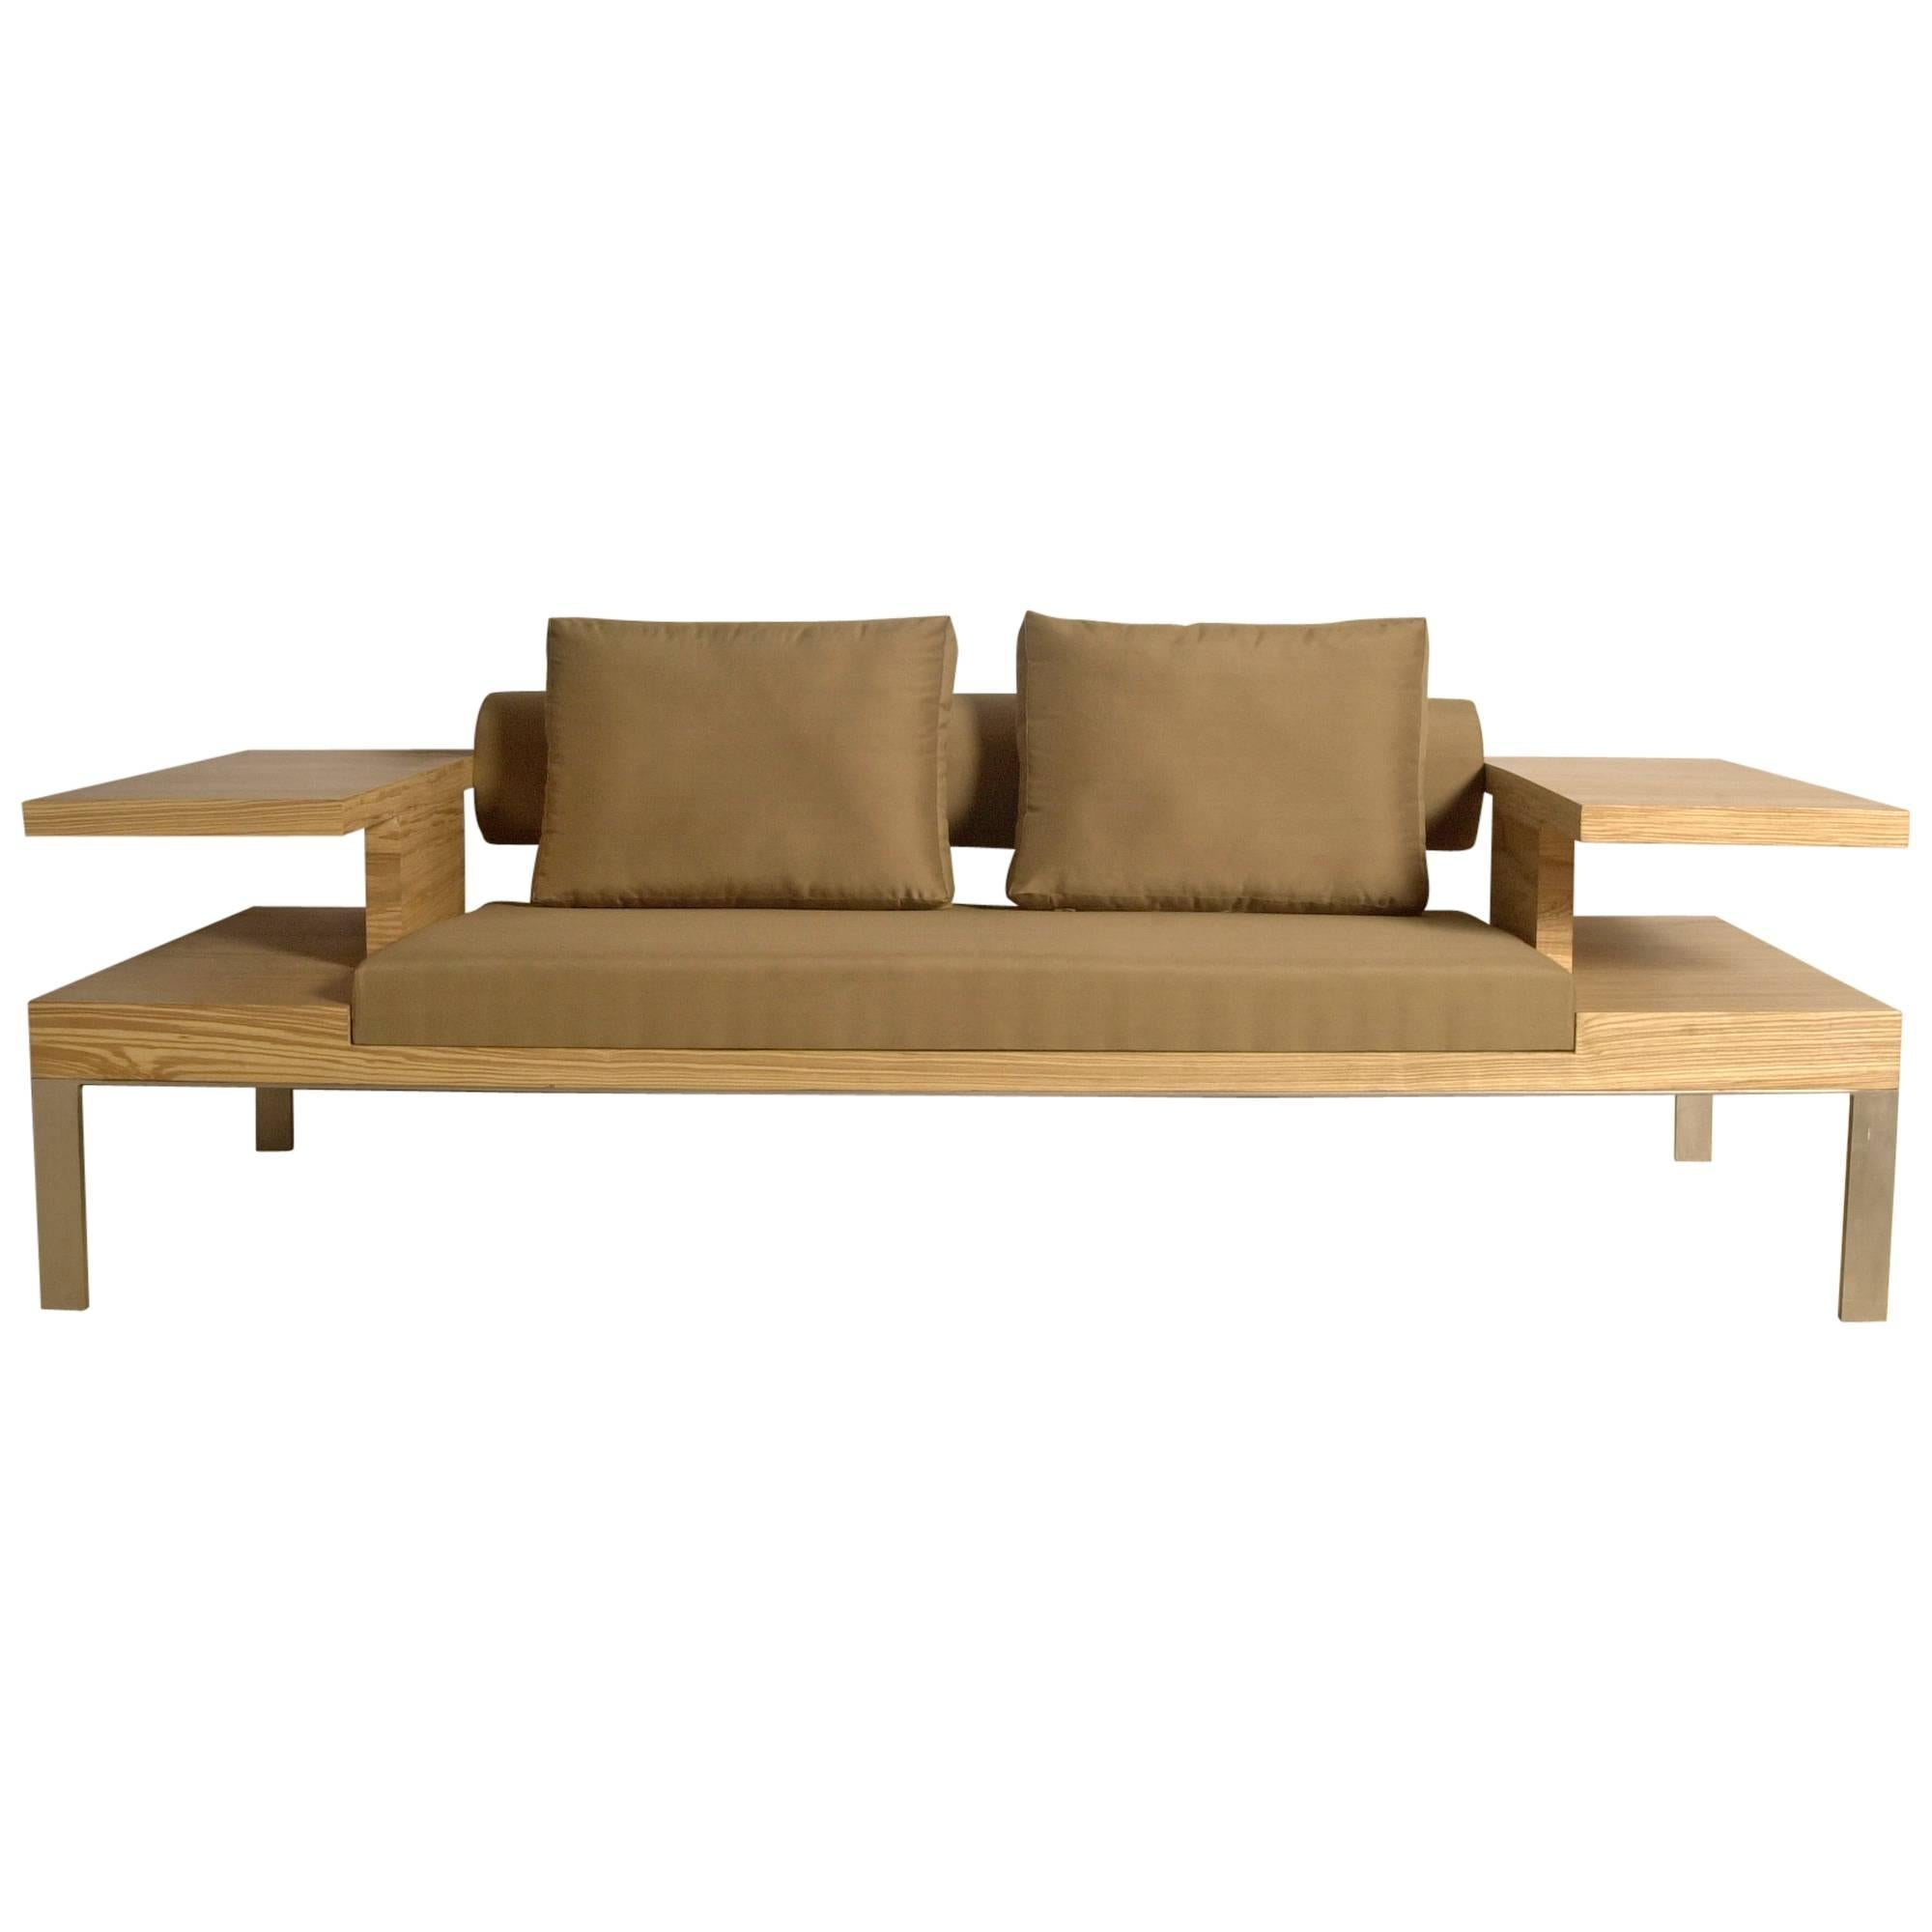 Sofa "Horizon" in Ash-Olive wood  by Aymeric Lefort